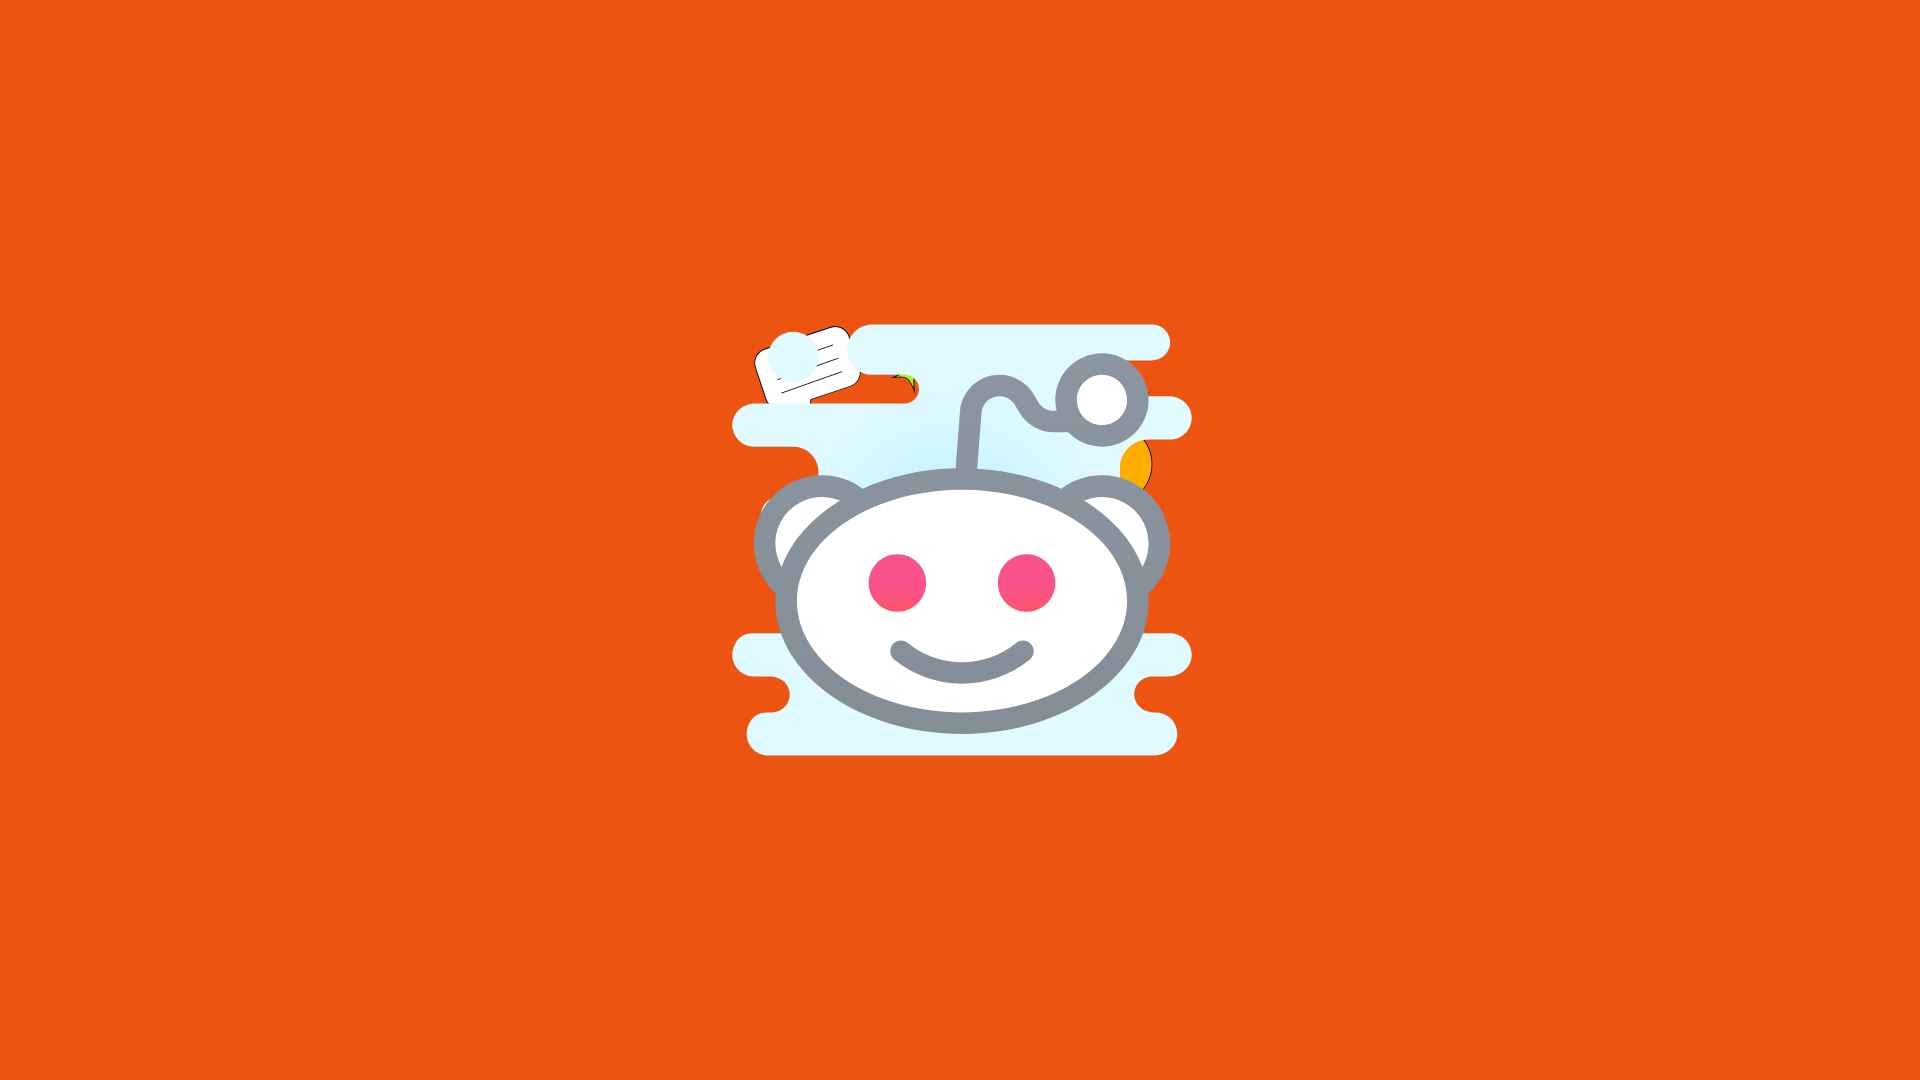 Can you use Reddit to find job opportunities or career advice?